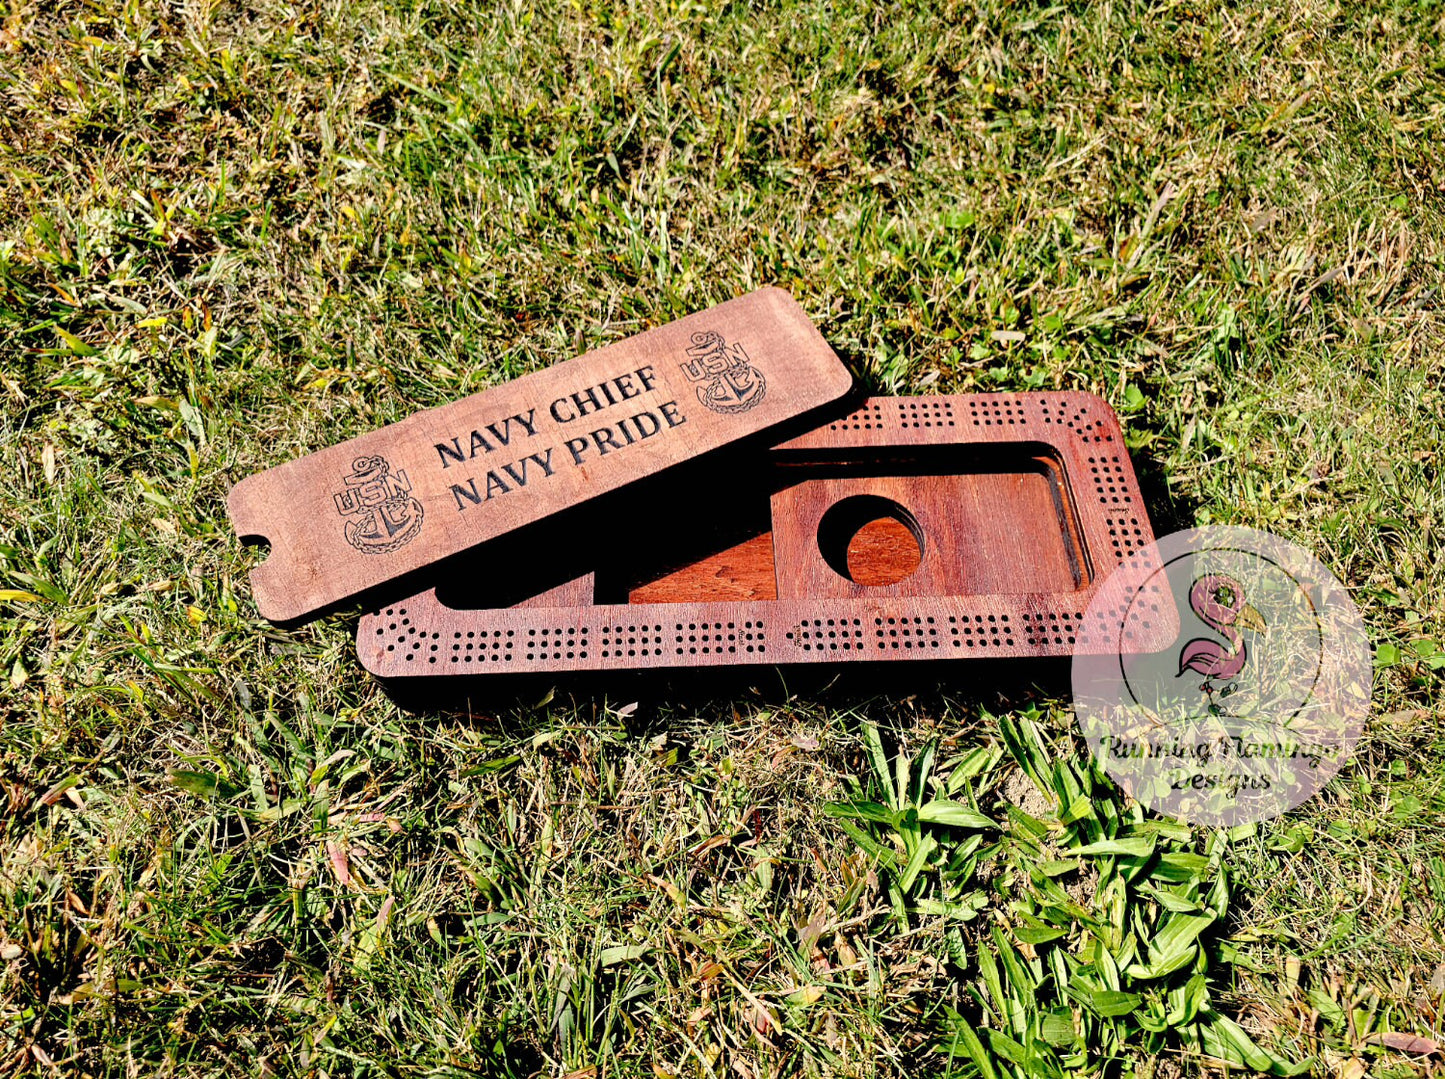 Cribbage board, navy chief gift, chief season, navy chief, military gift, engraved cribbage,wood cribbage board,navy pride,gift for military